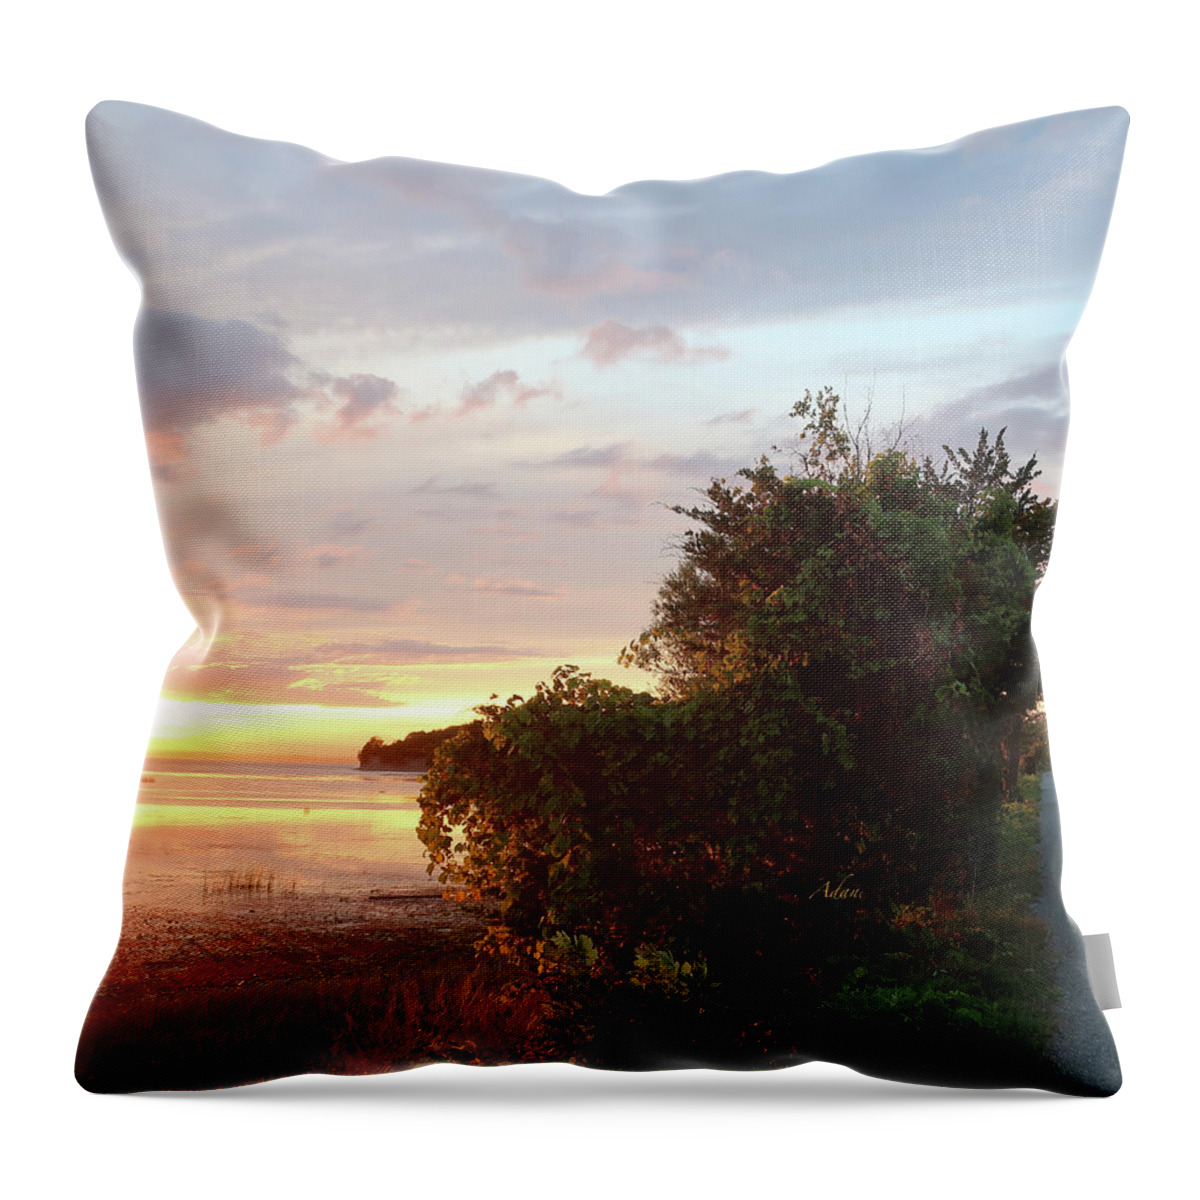 Island Line Trail Throw Pillow featuring the photograph Island Line Trail Sunset via Colchester Vertical by Felipe Adan Lerma